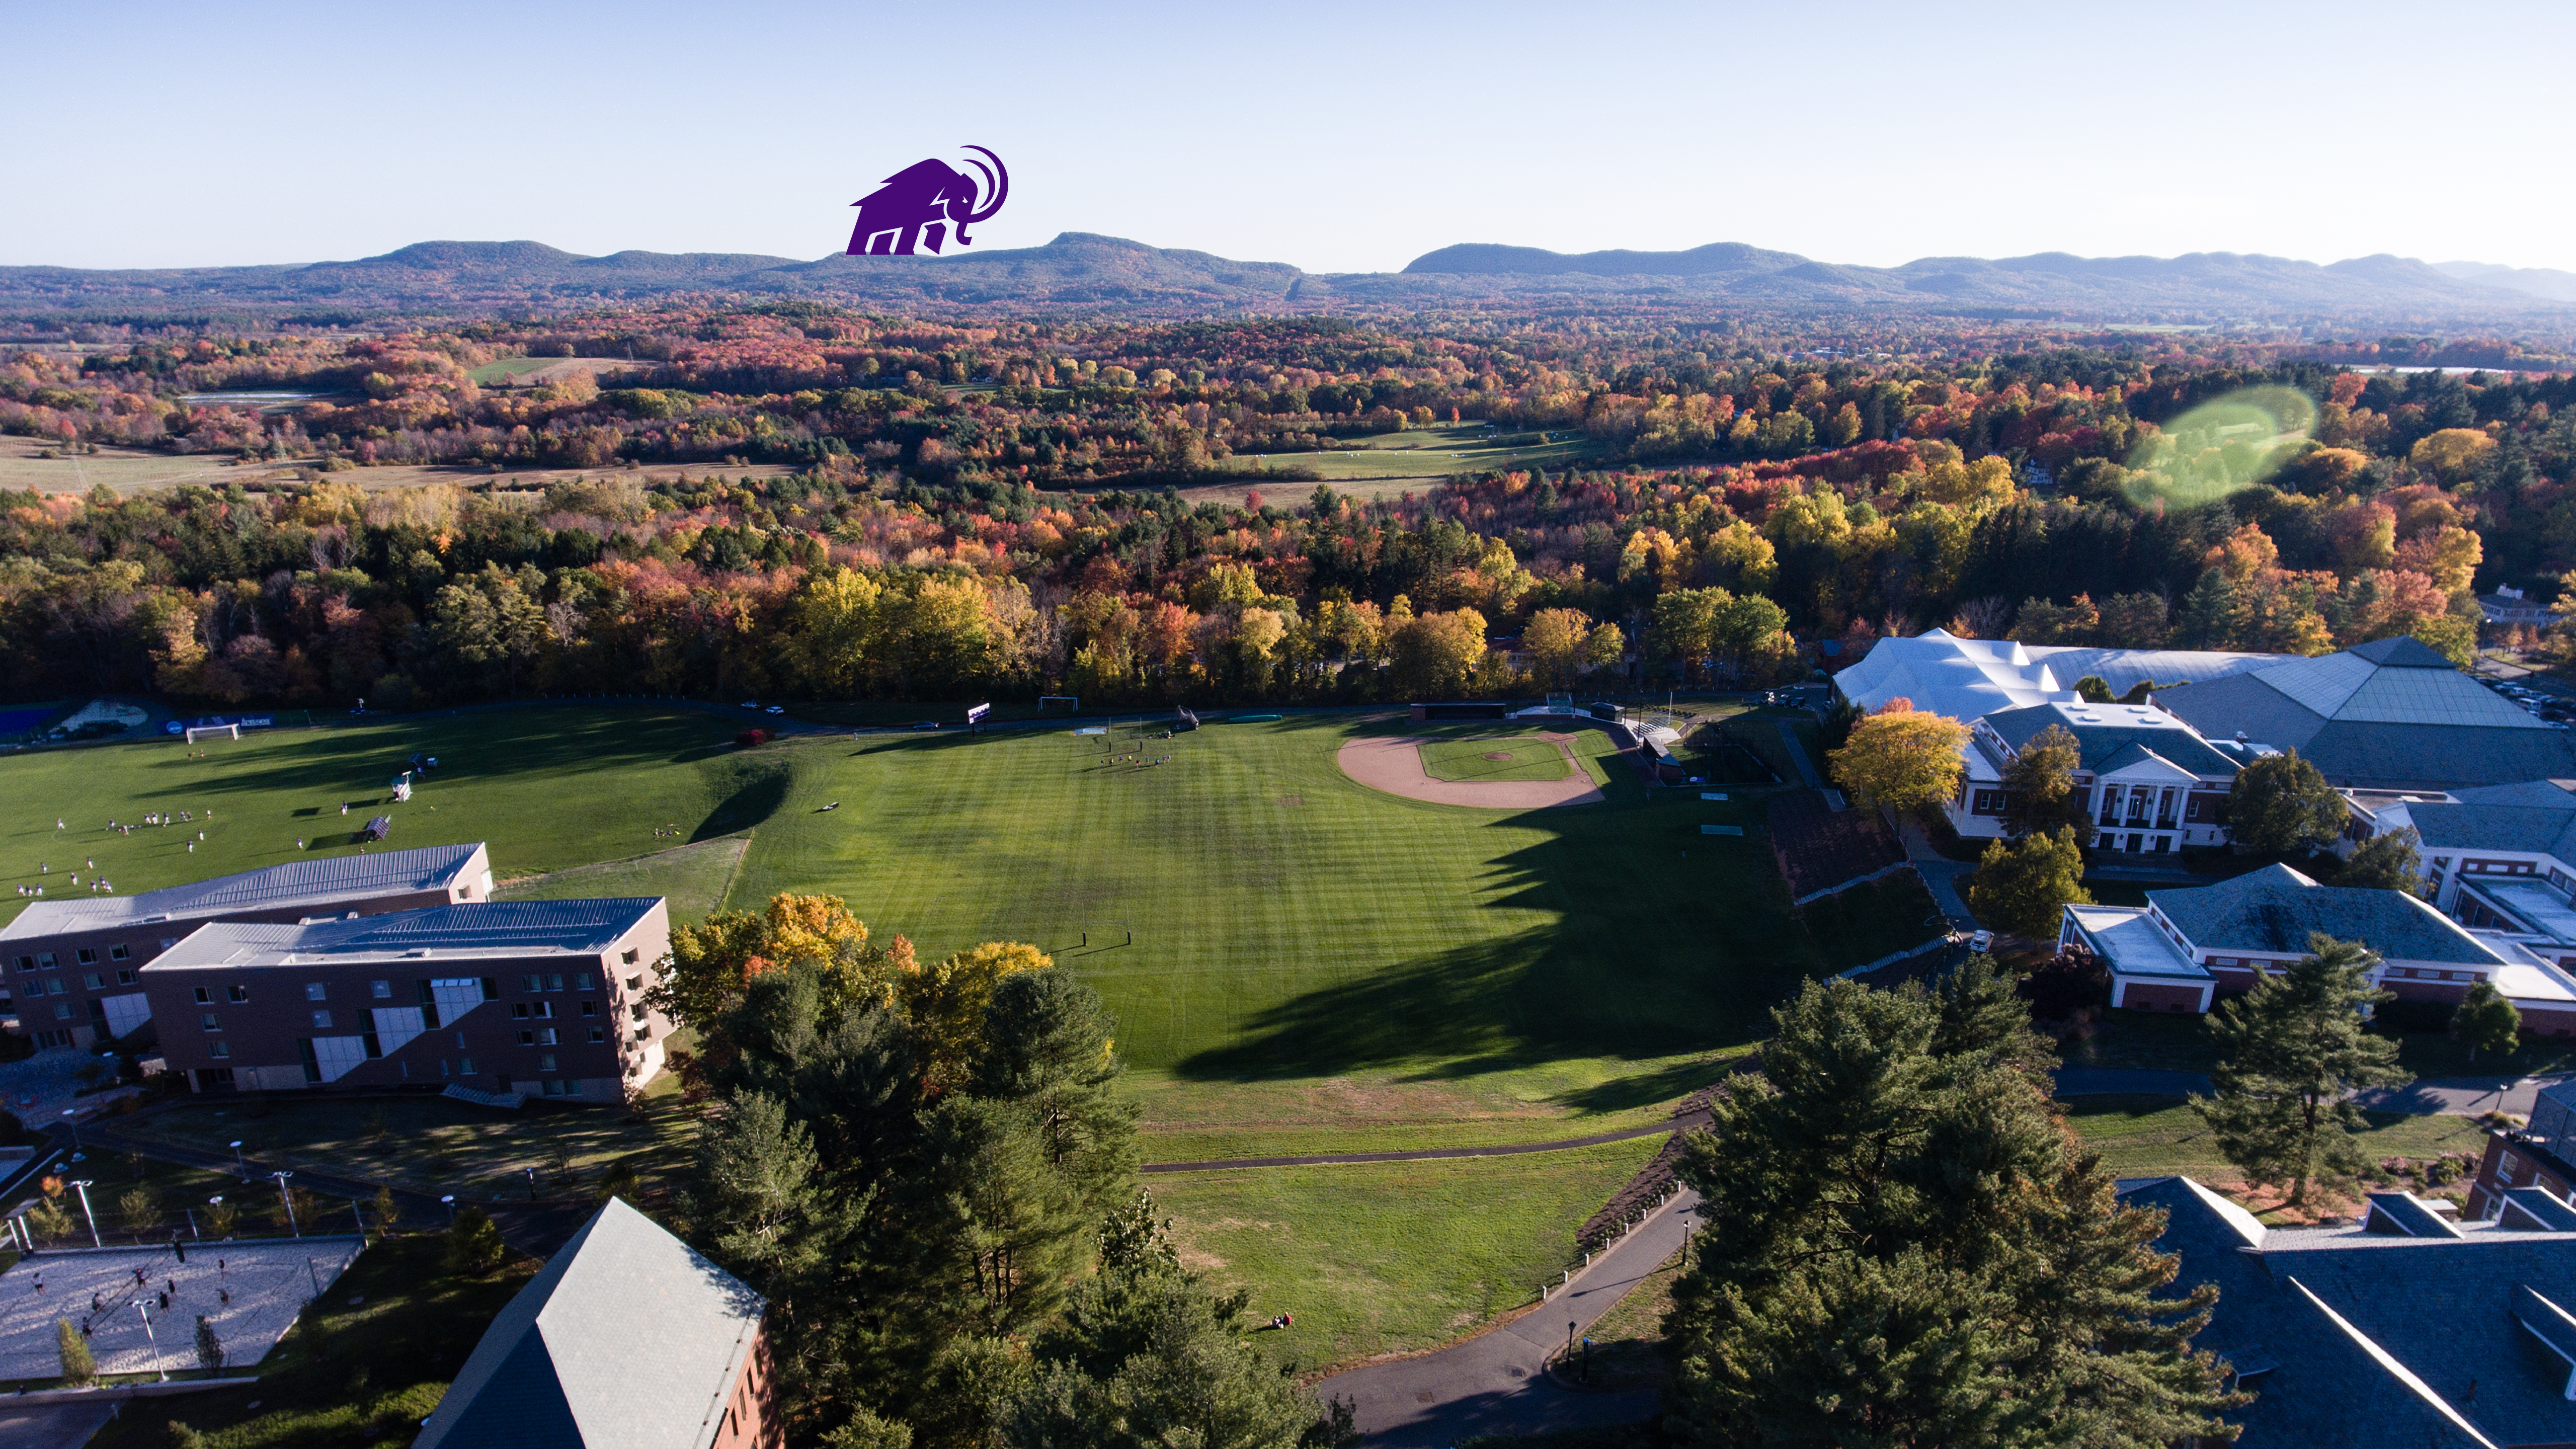 Mammoth walking across the range in an aerial photo of campus